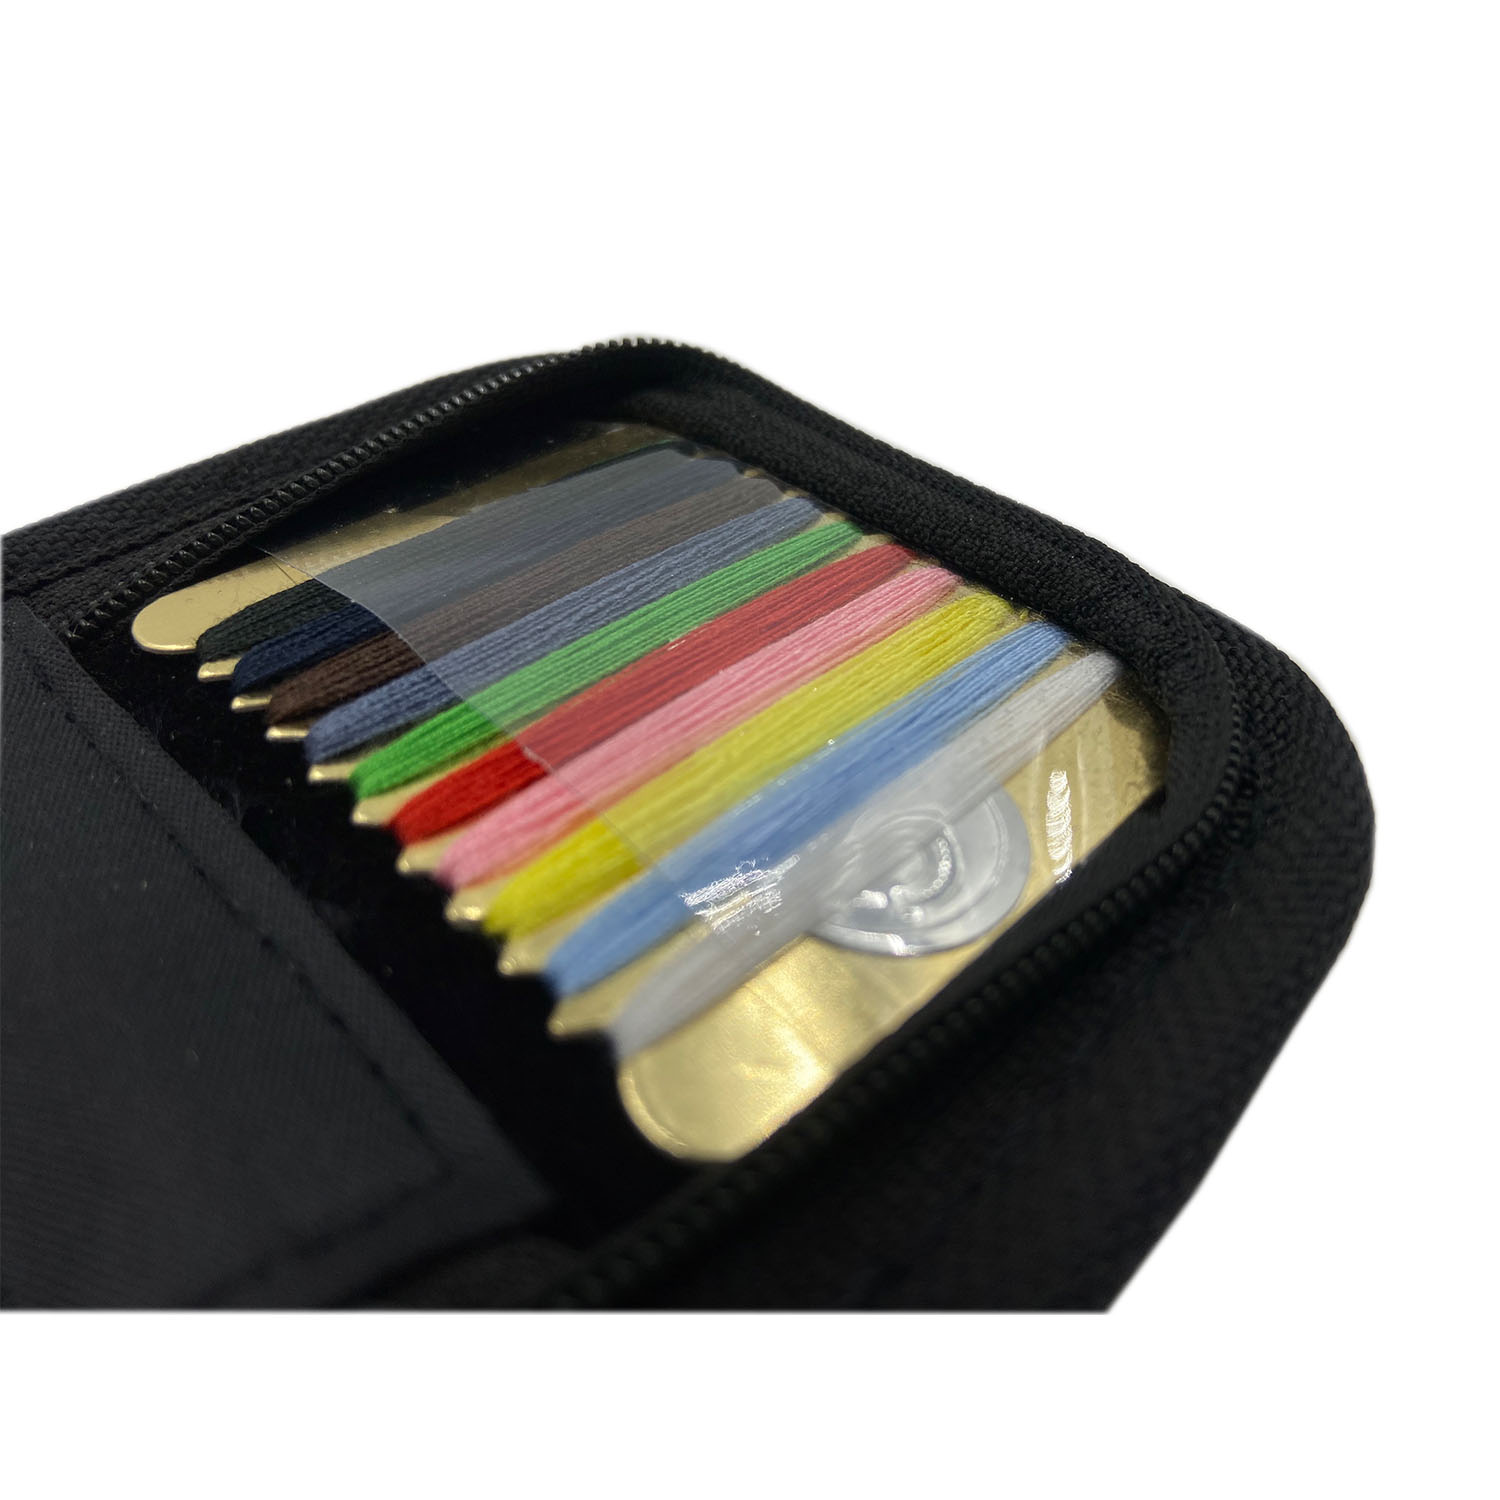 High Quality Customised Sewing Kit